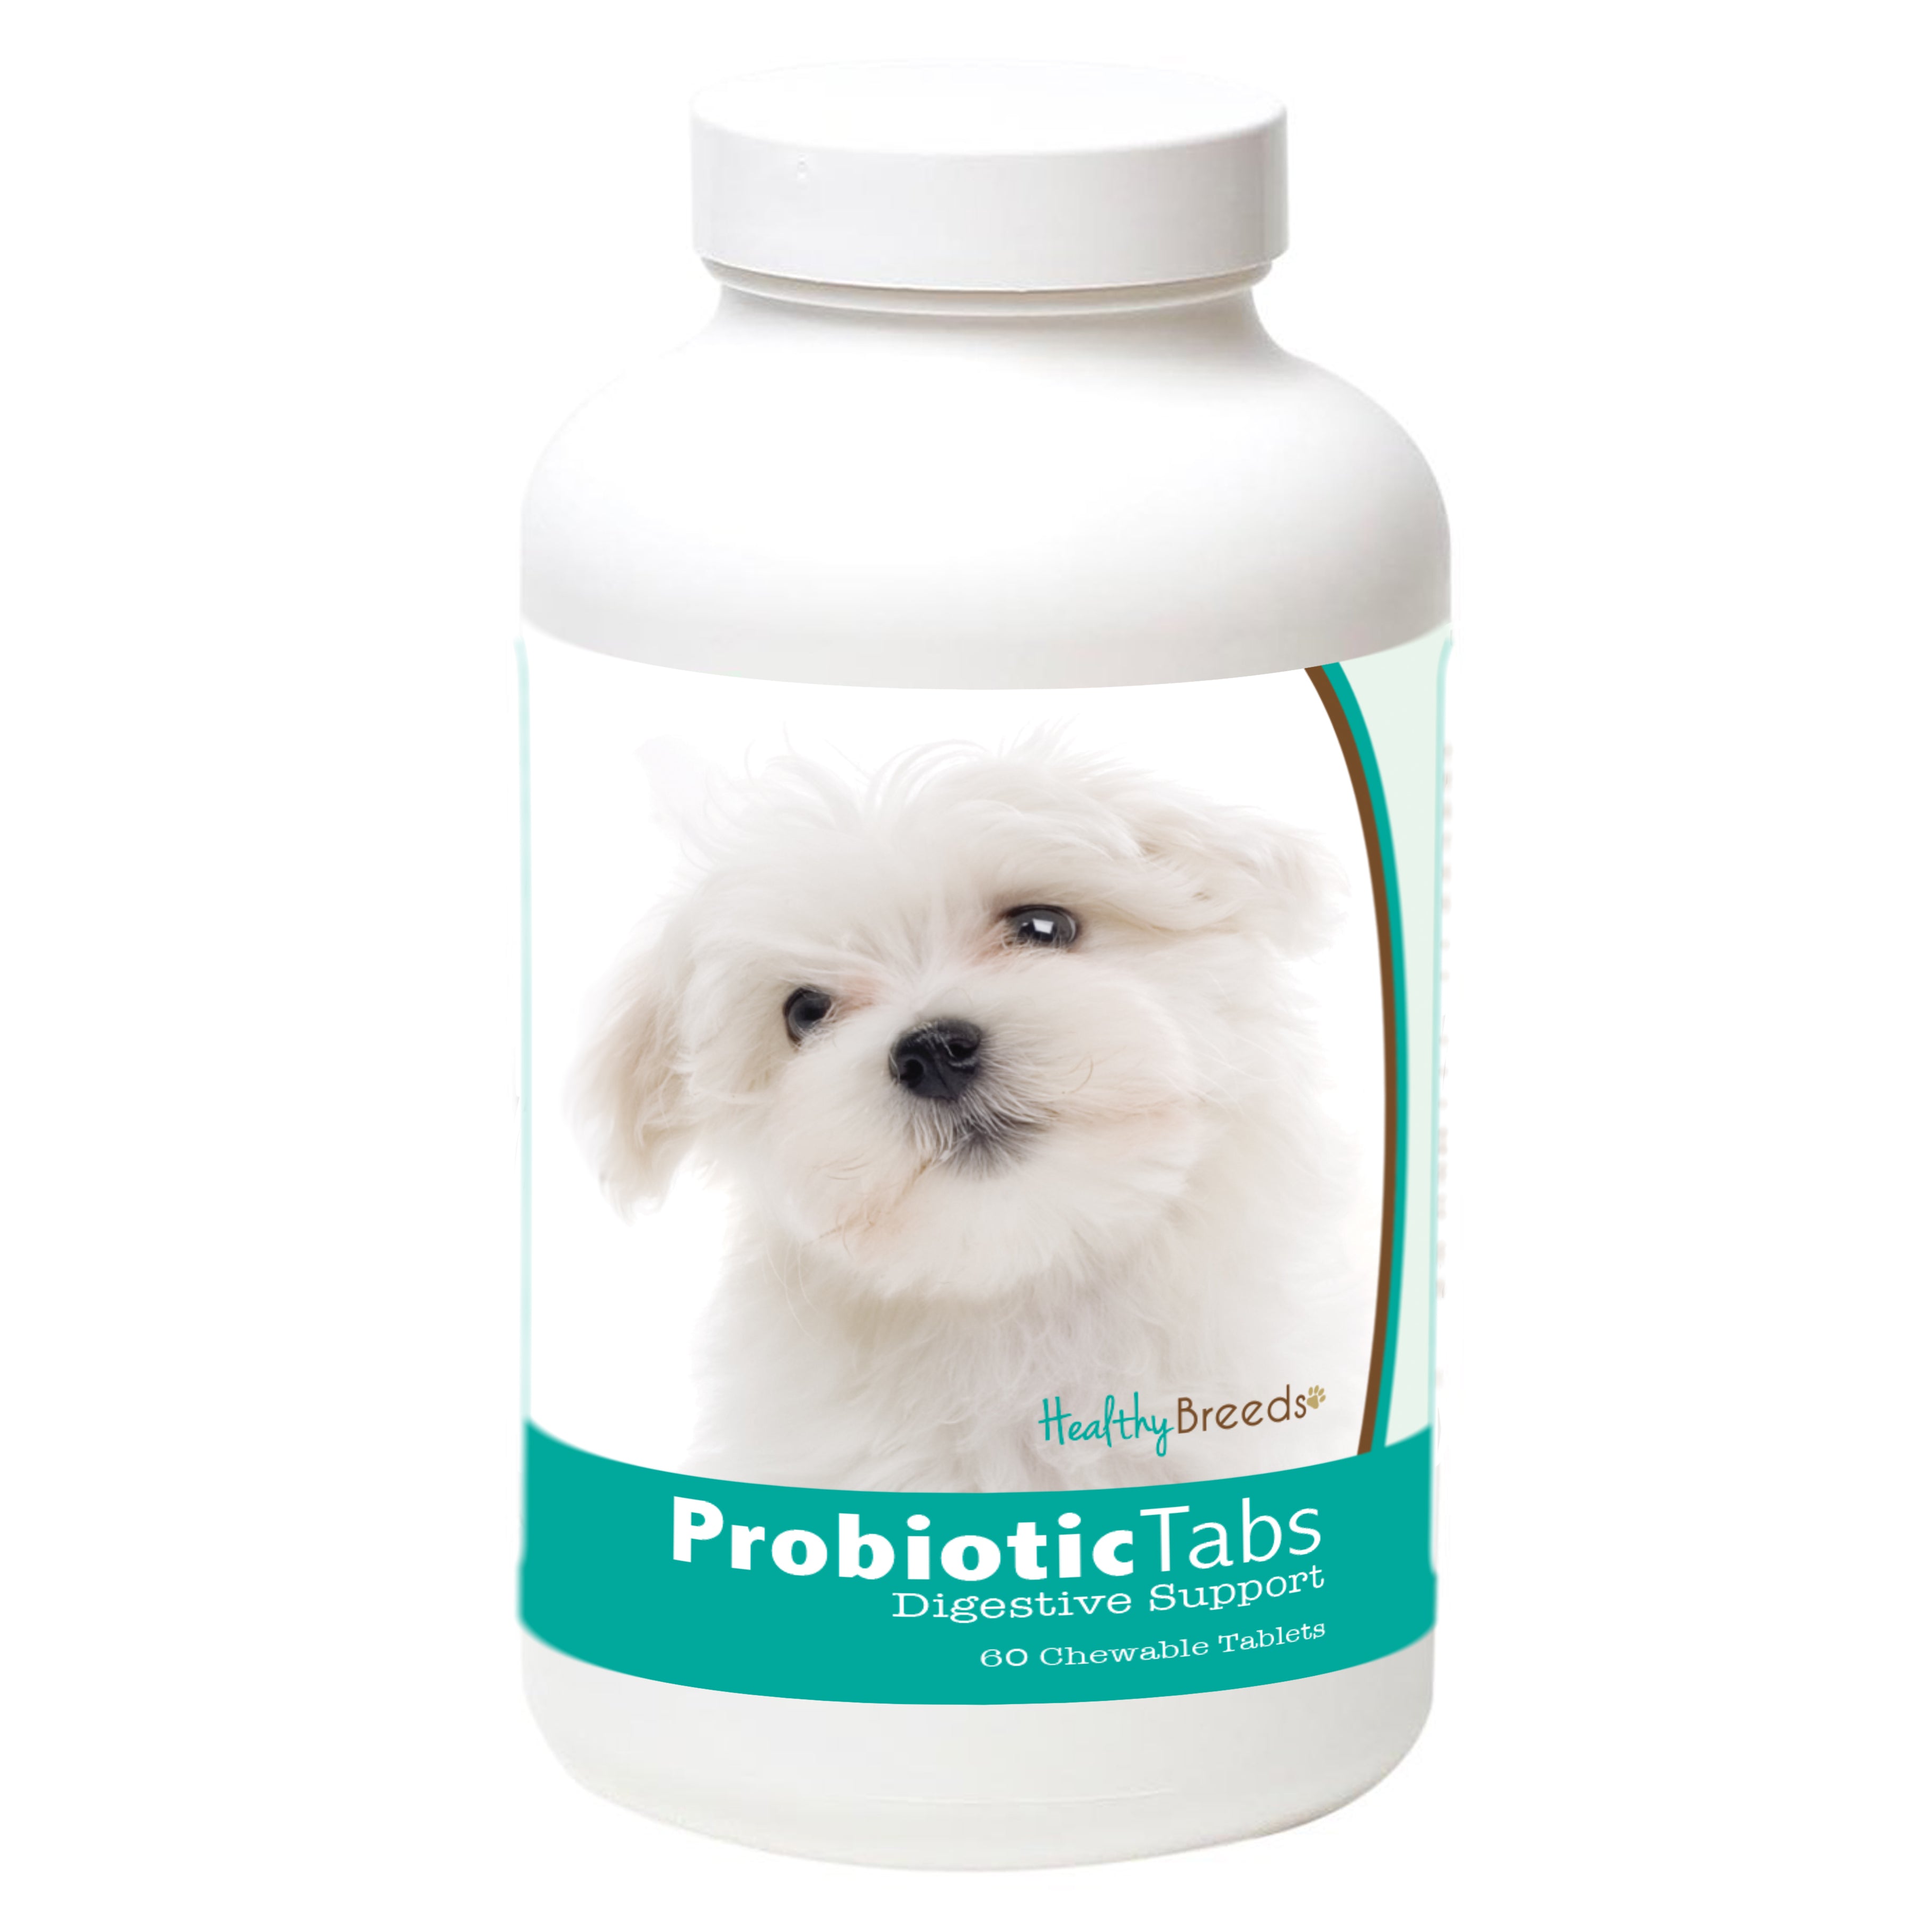 Maltese Probiotic and Digestive Support for Dogs 60 Count